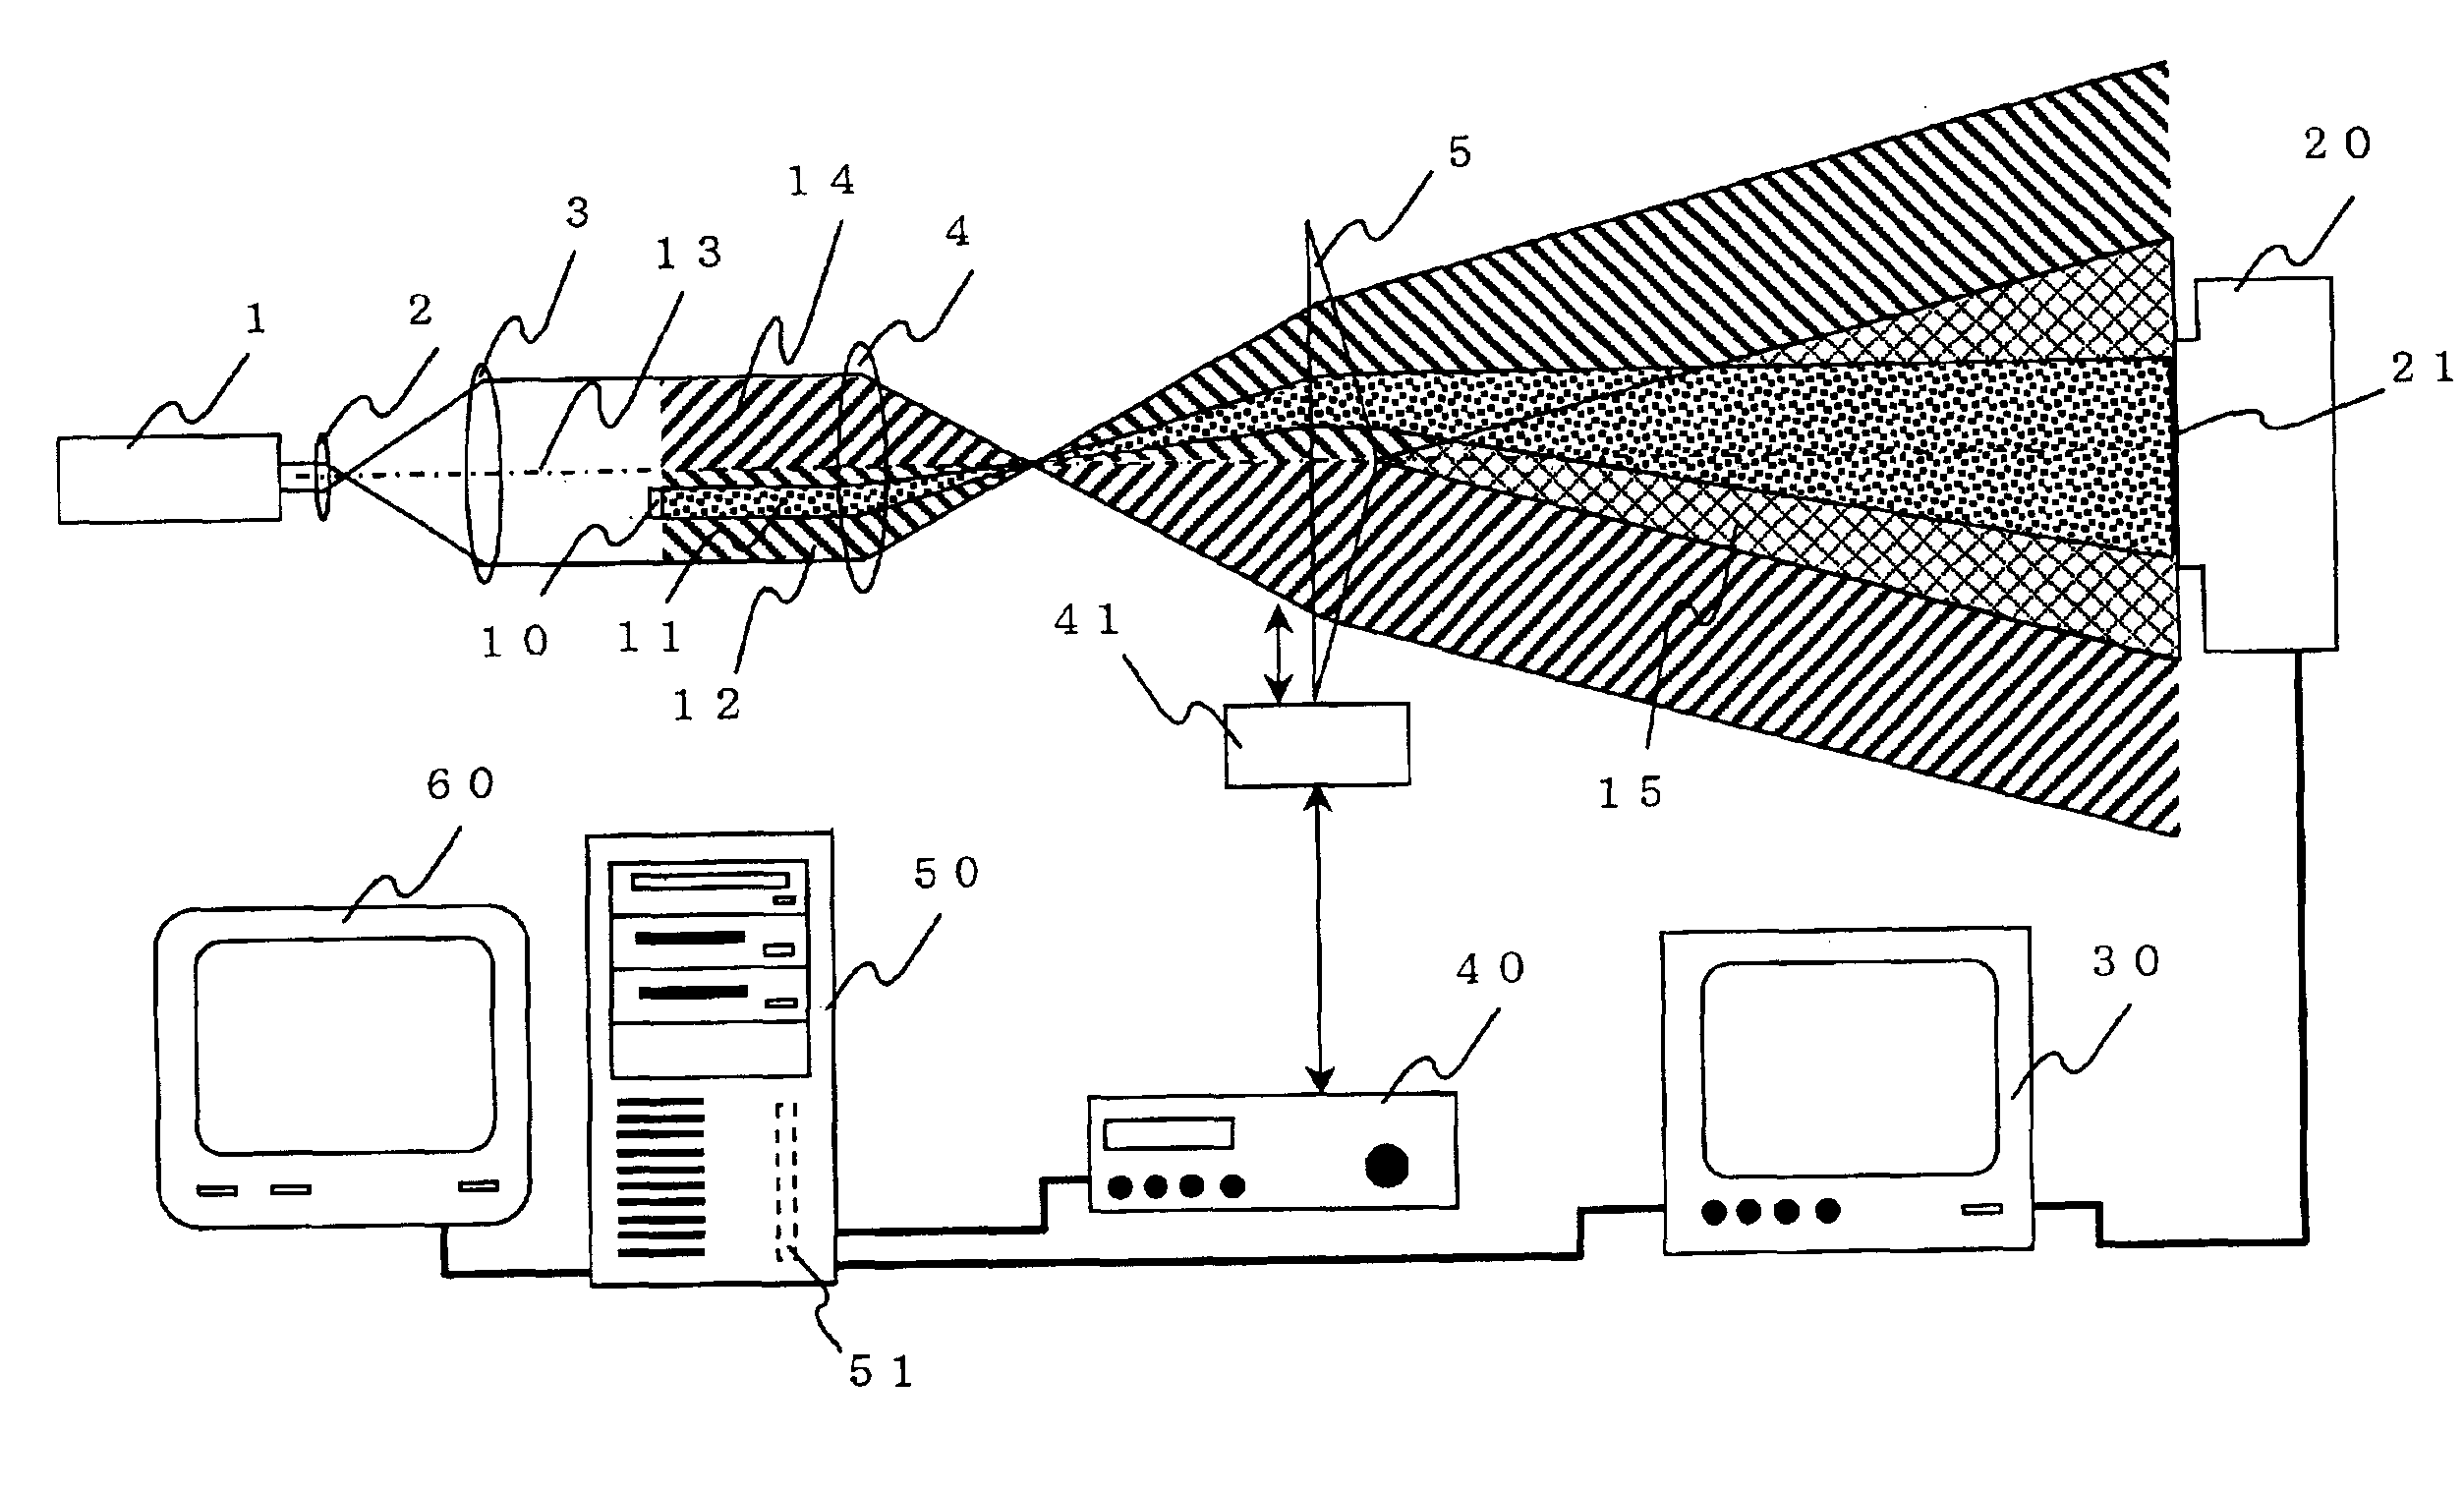 Interference measuring device